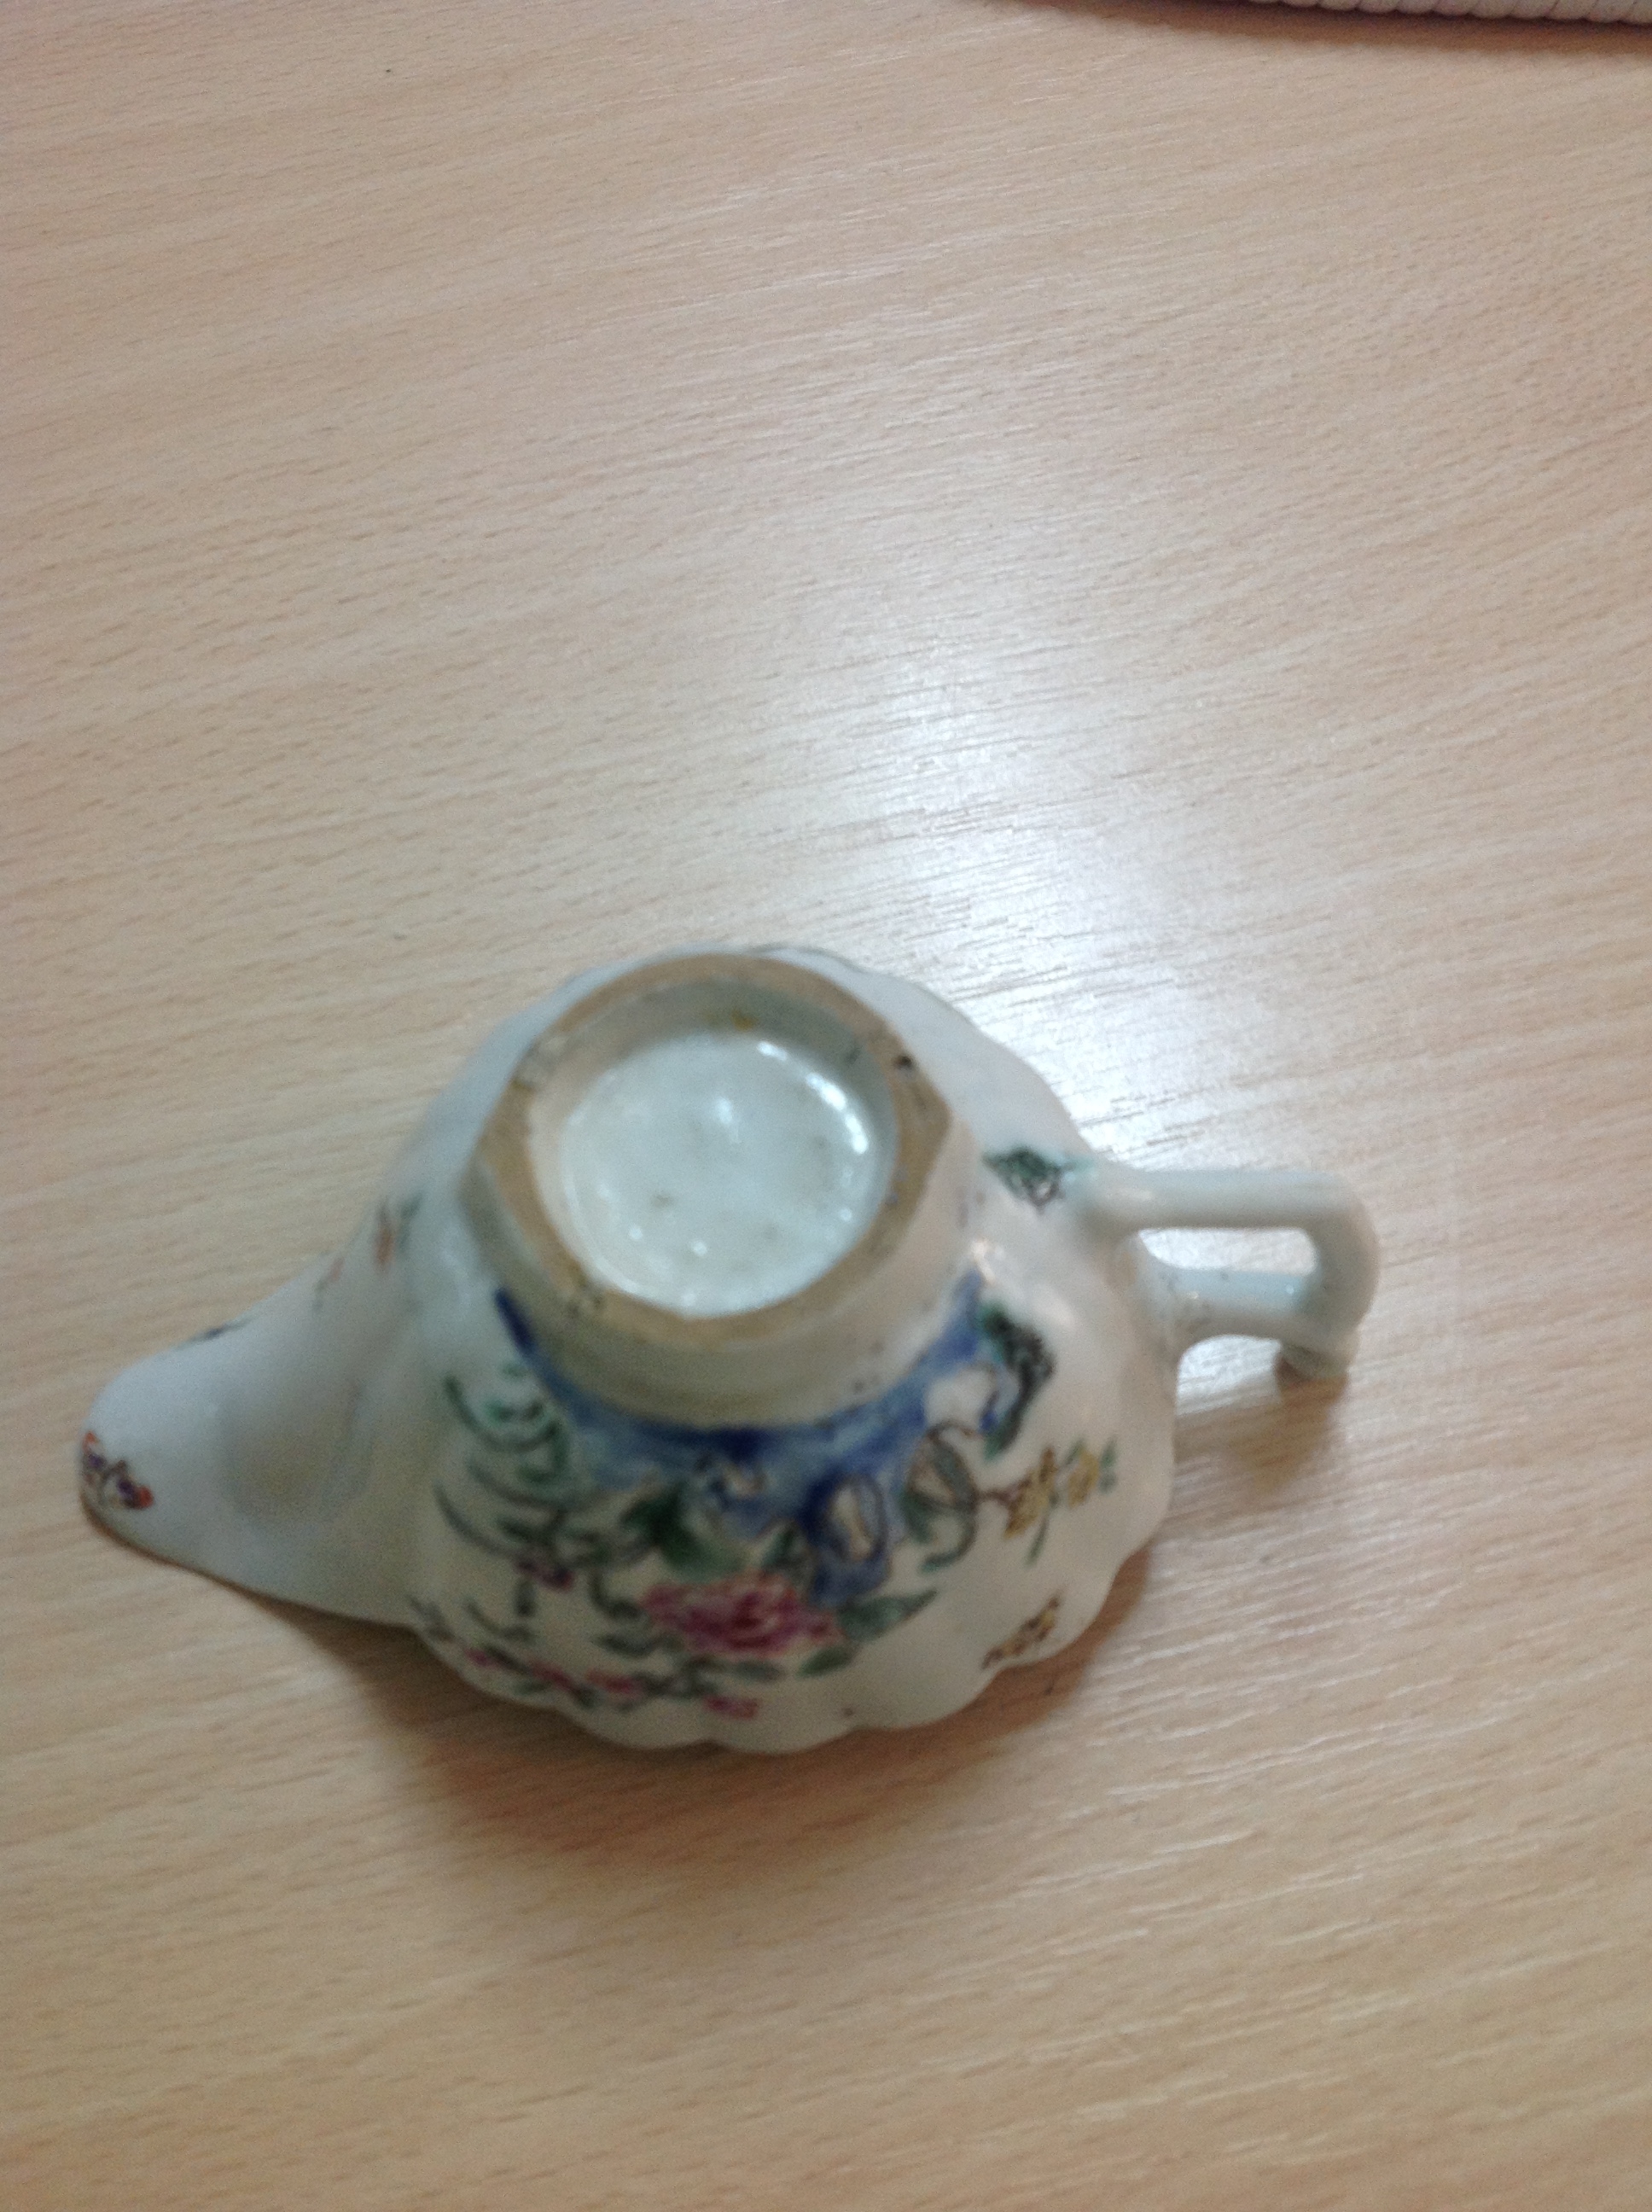 An early Worcester porcelain cream boat, circa 1753 with scalloped edge, the interior has hatched - Image 3 of 4